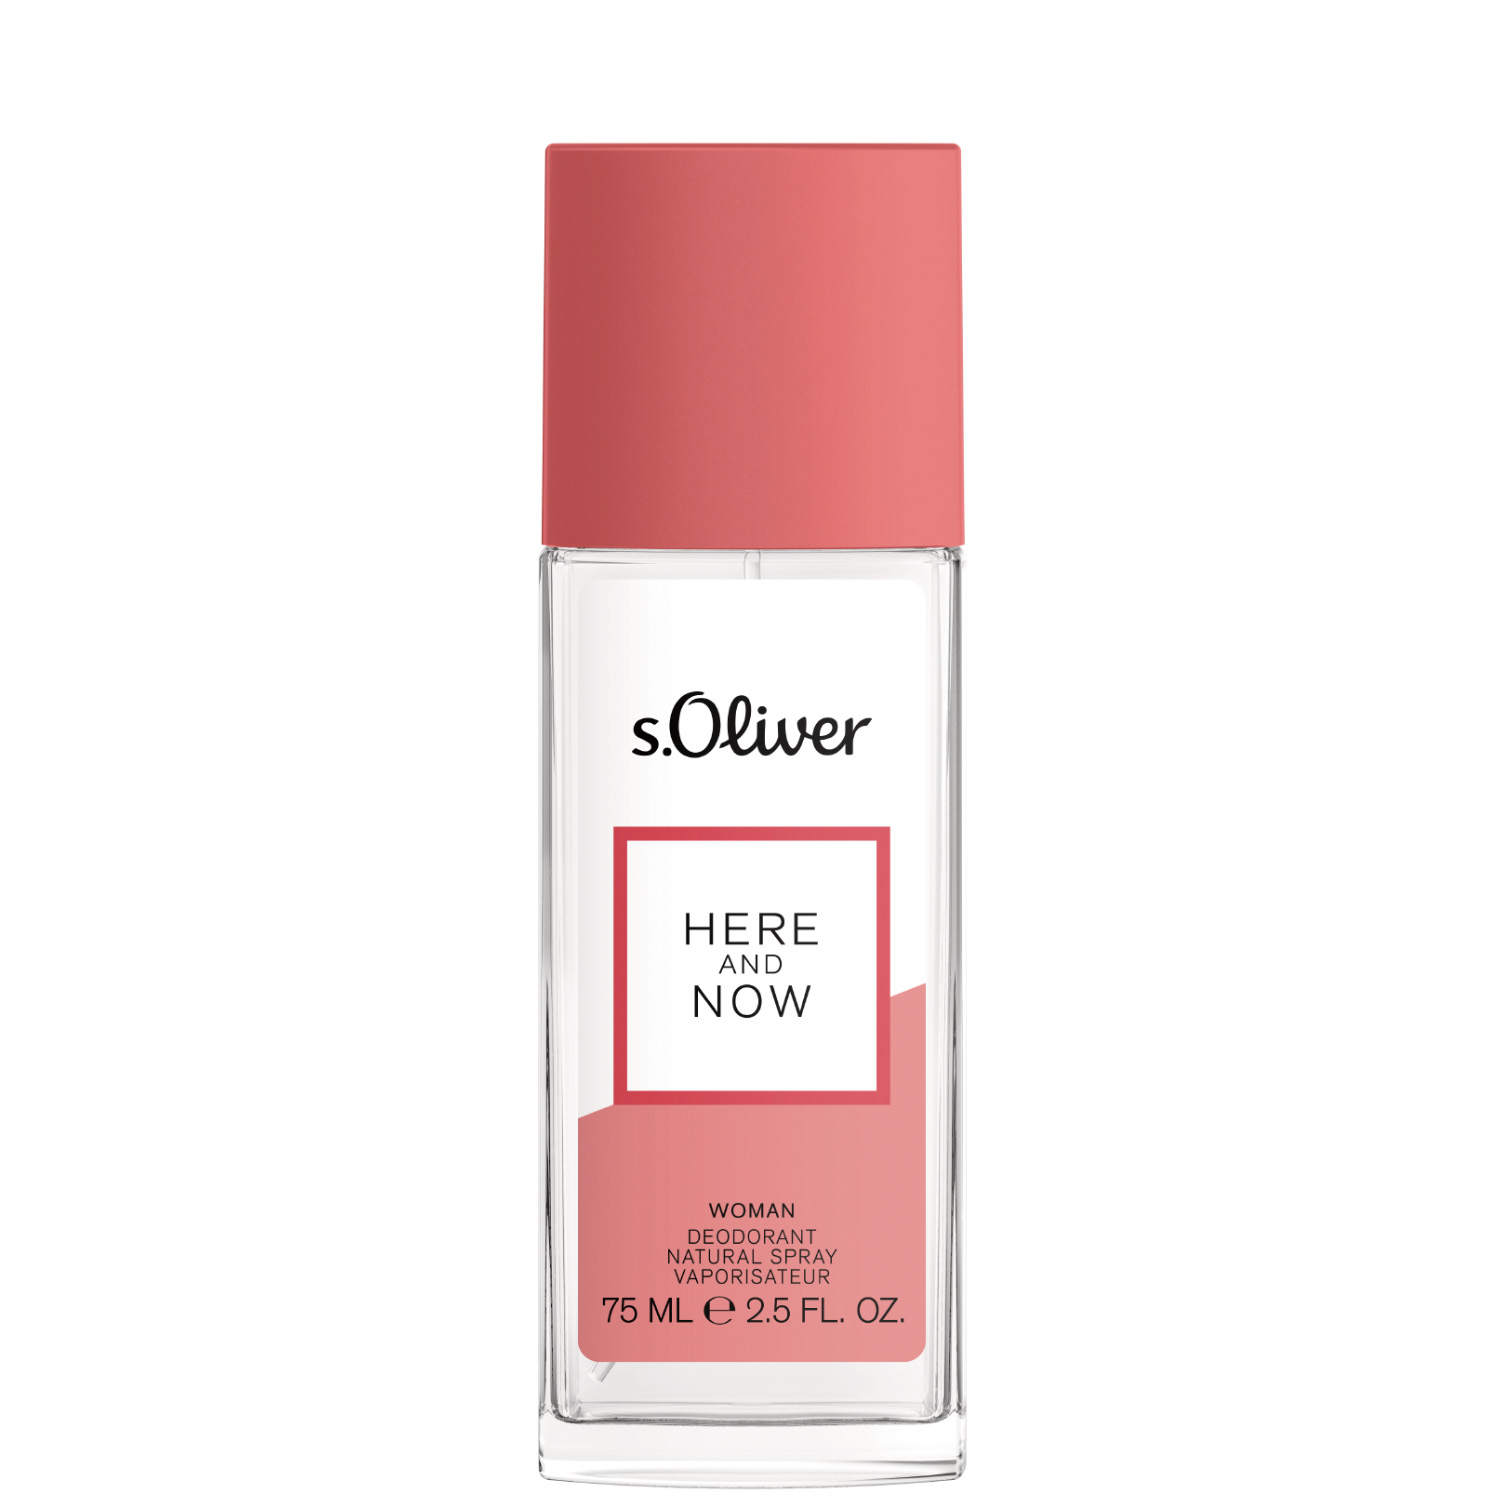 S.Oliver Here And Now Women Deodorant Spray Natural 75ml